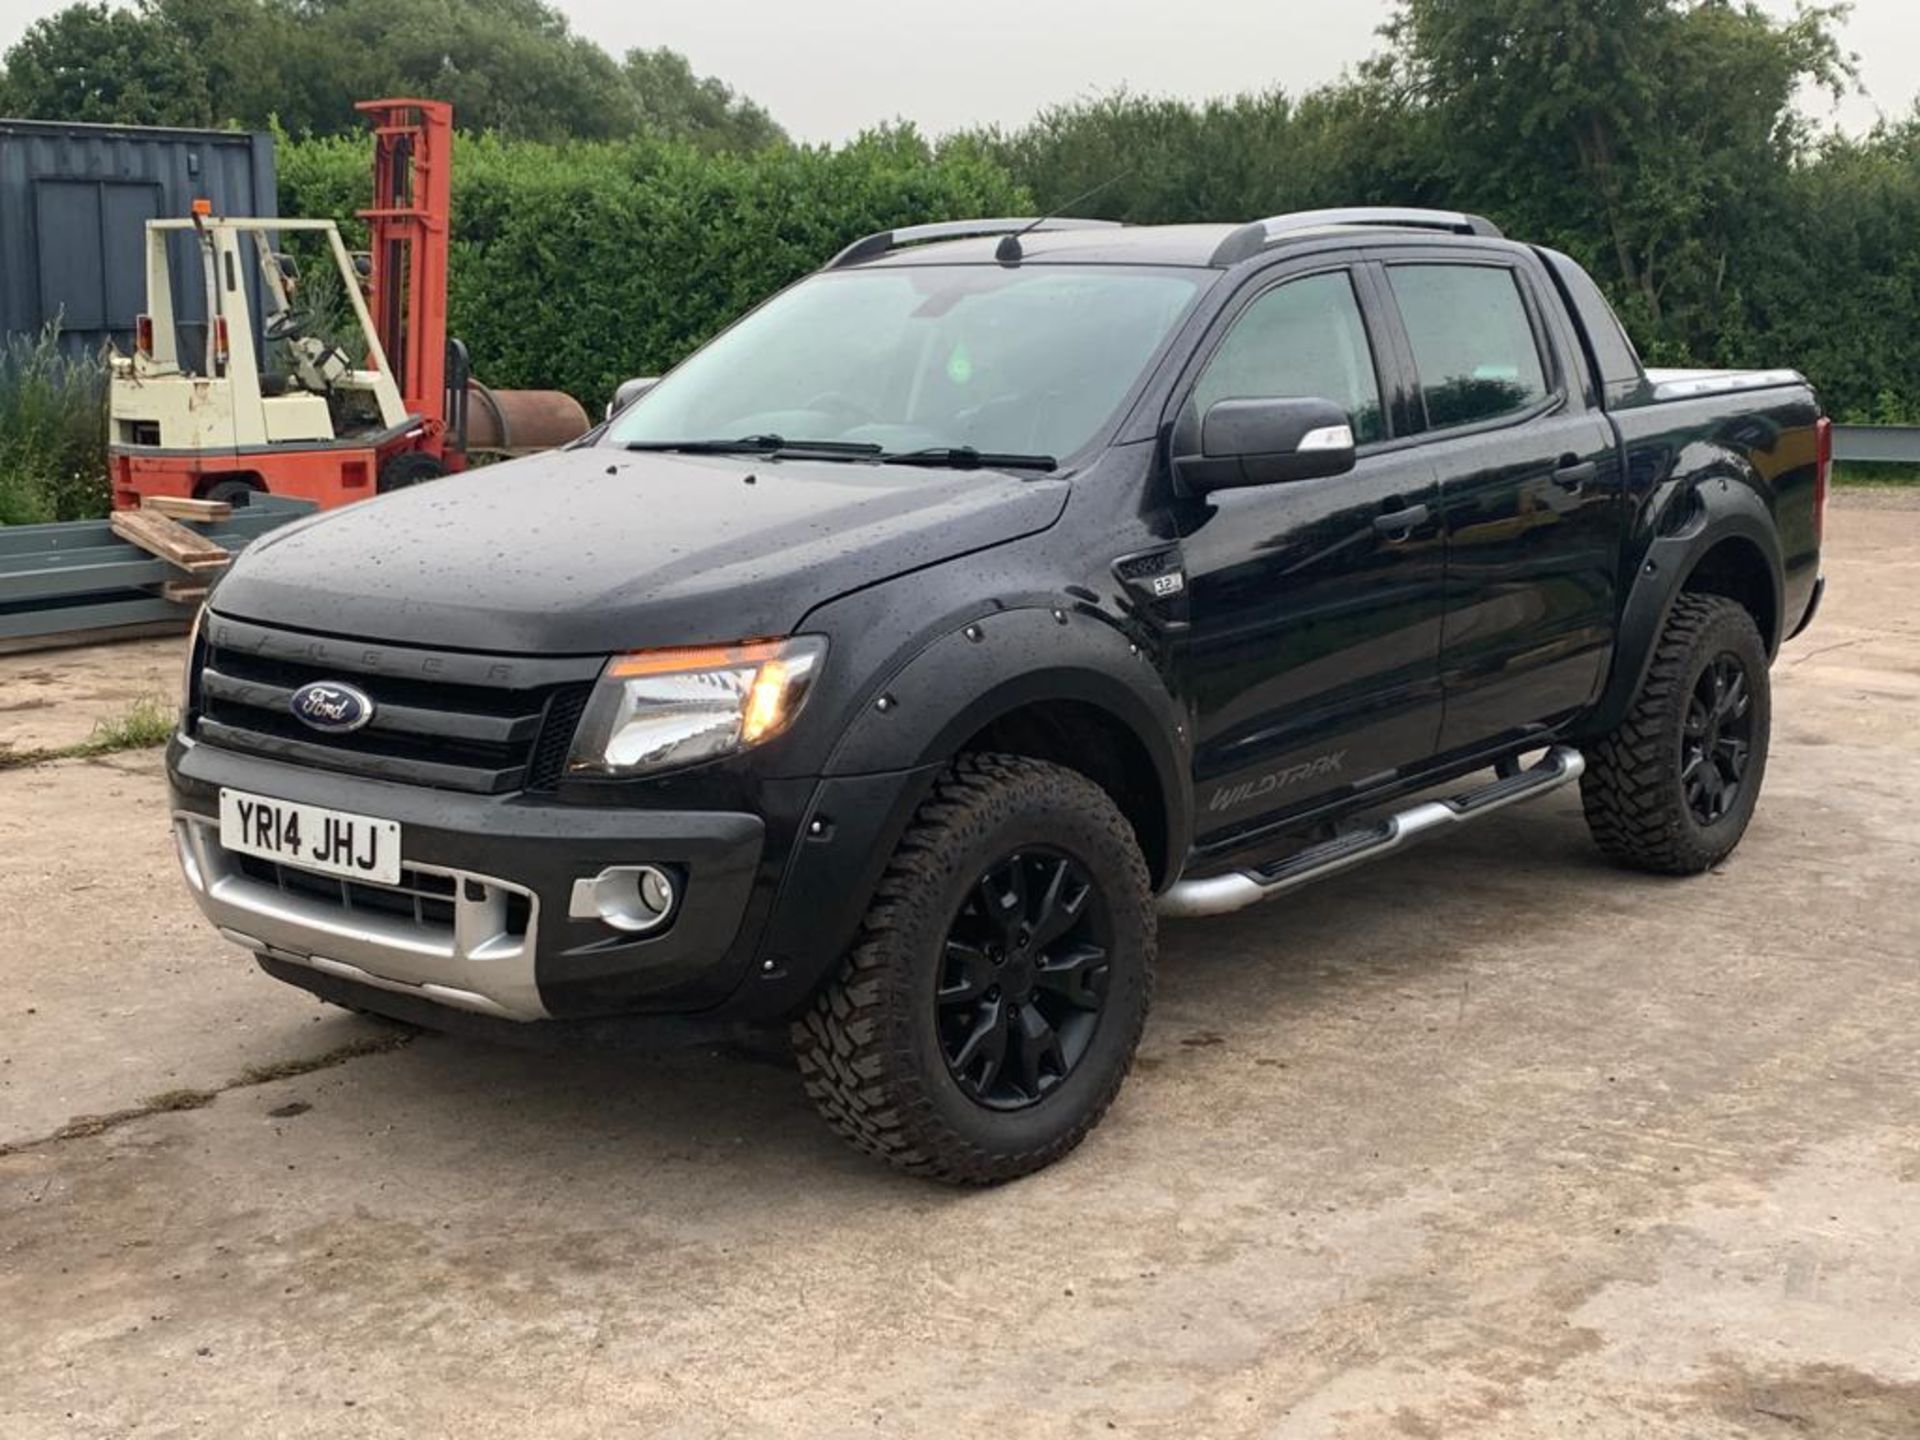 2014/14 REG FORD RANGER WILDTRAK 4X4 D/C TDCI 3.2L AUTOMATIC BLACK PICK-UP, SHOWING 2 FORMER KEEPERS